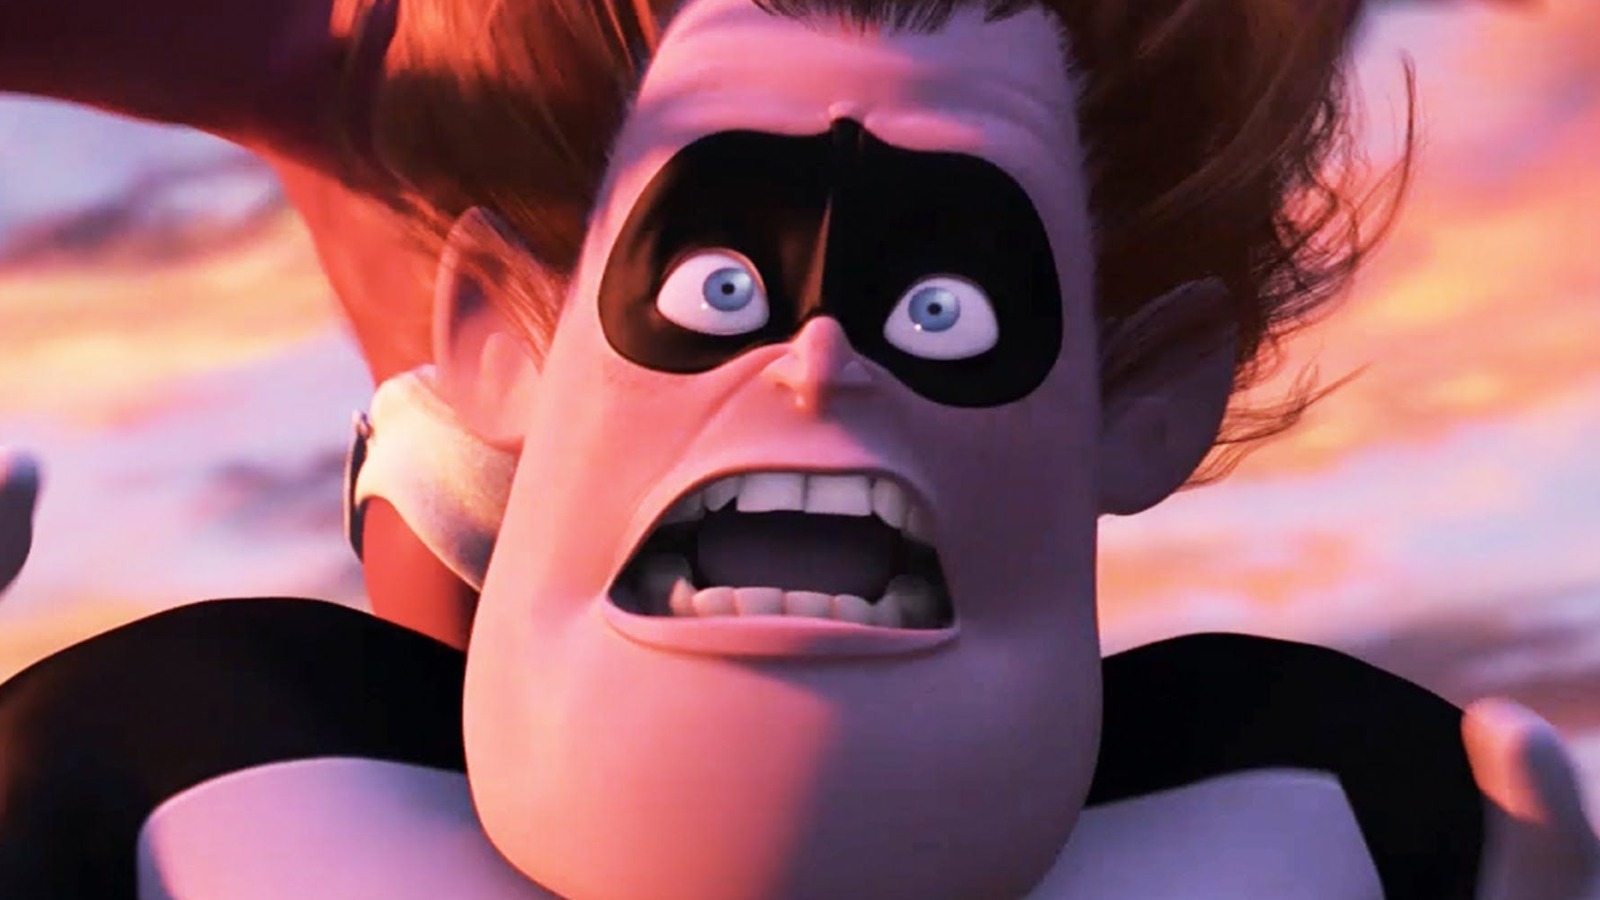 The Original Villain Of The Incredibles Wasn't Syndrome